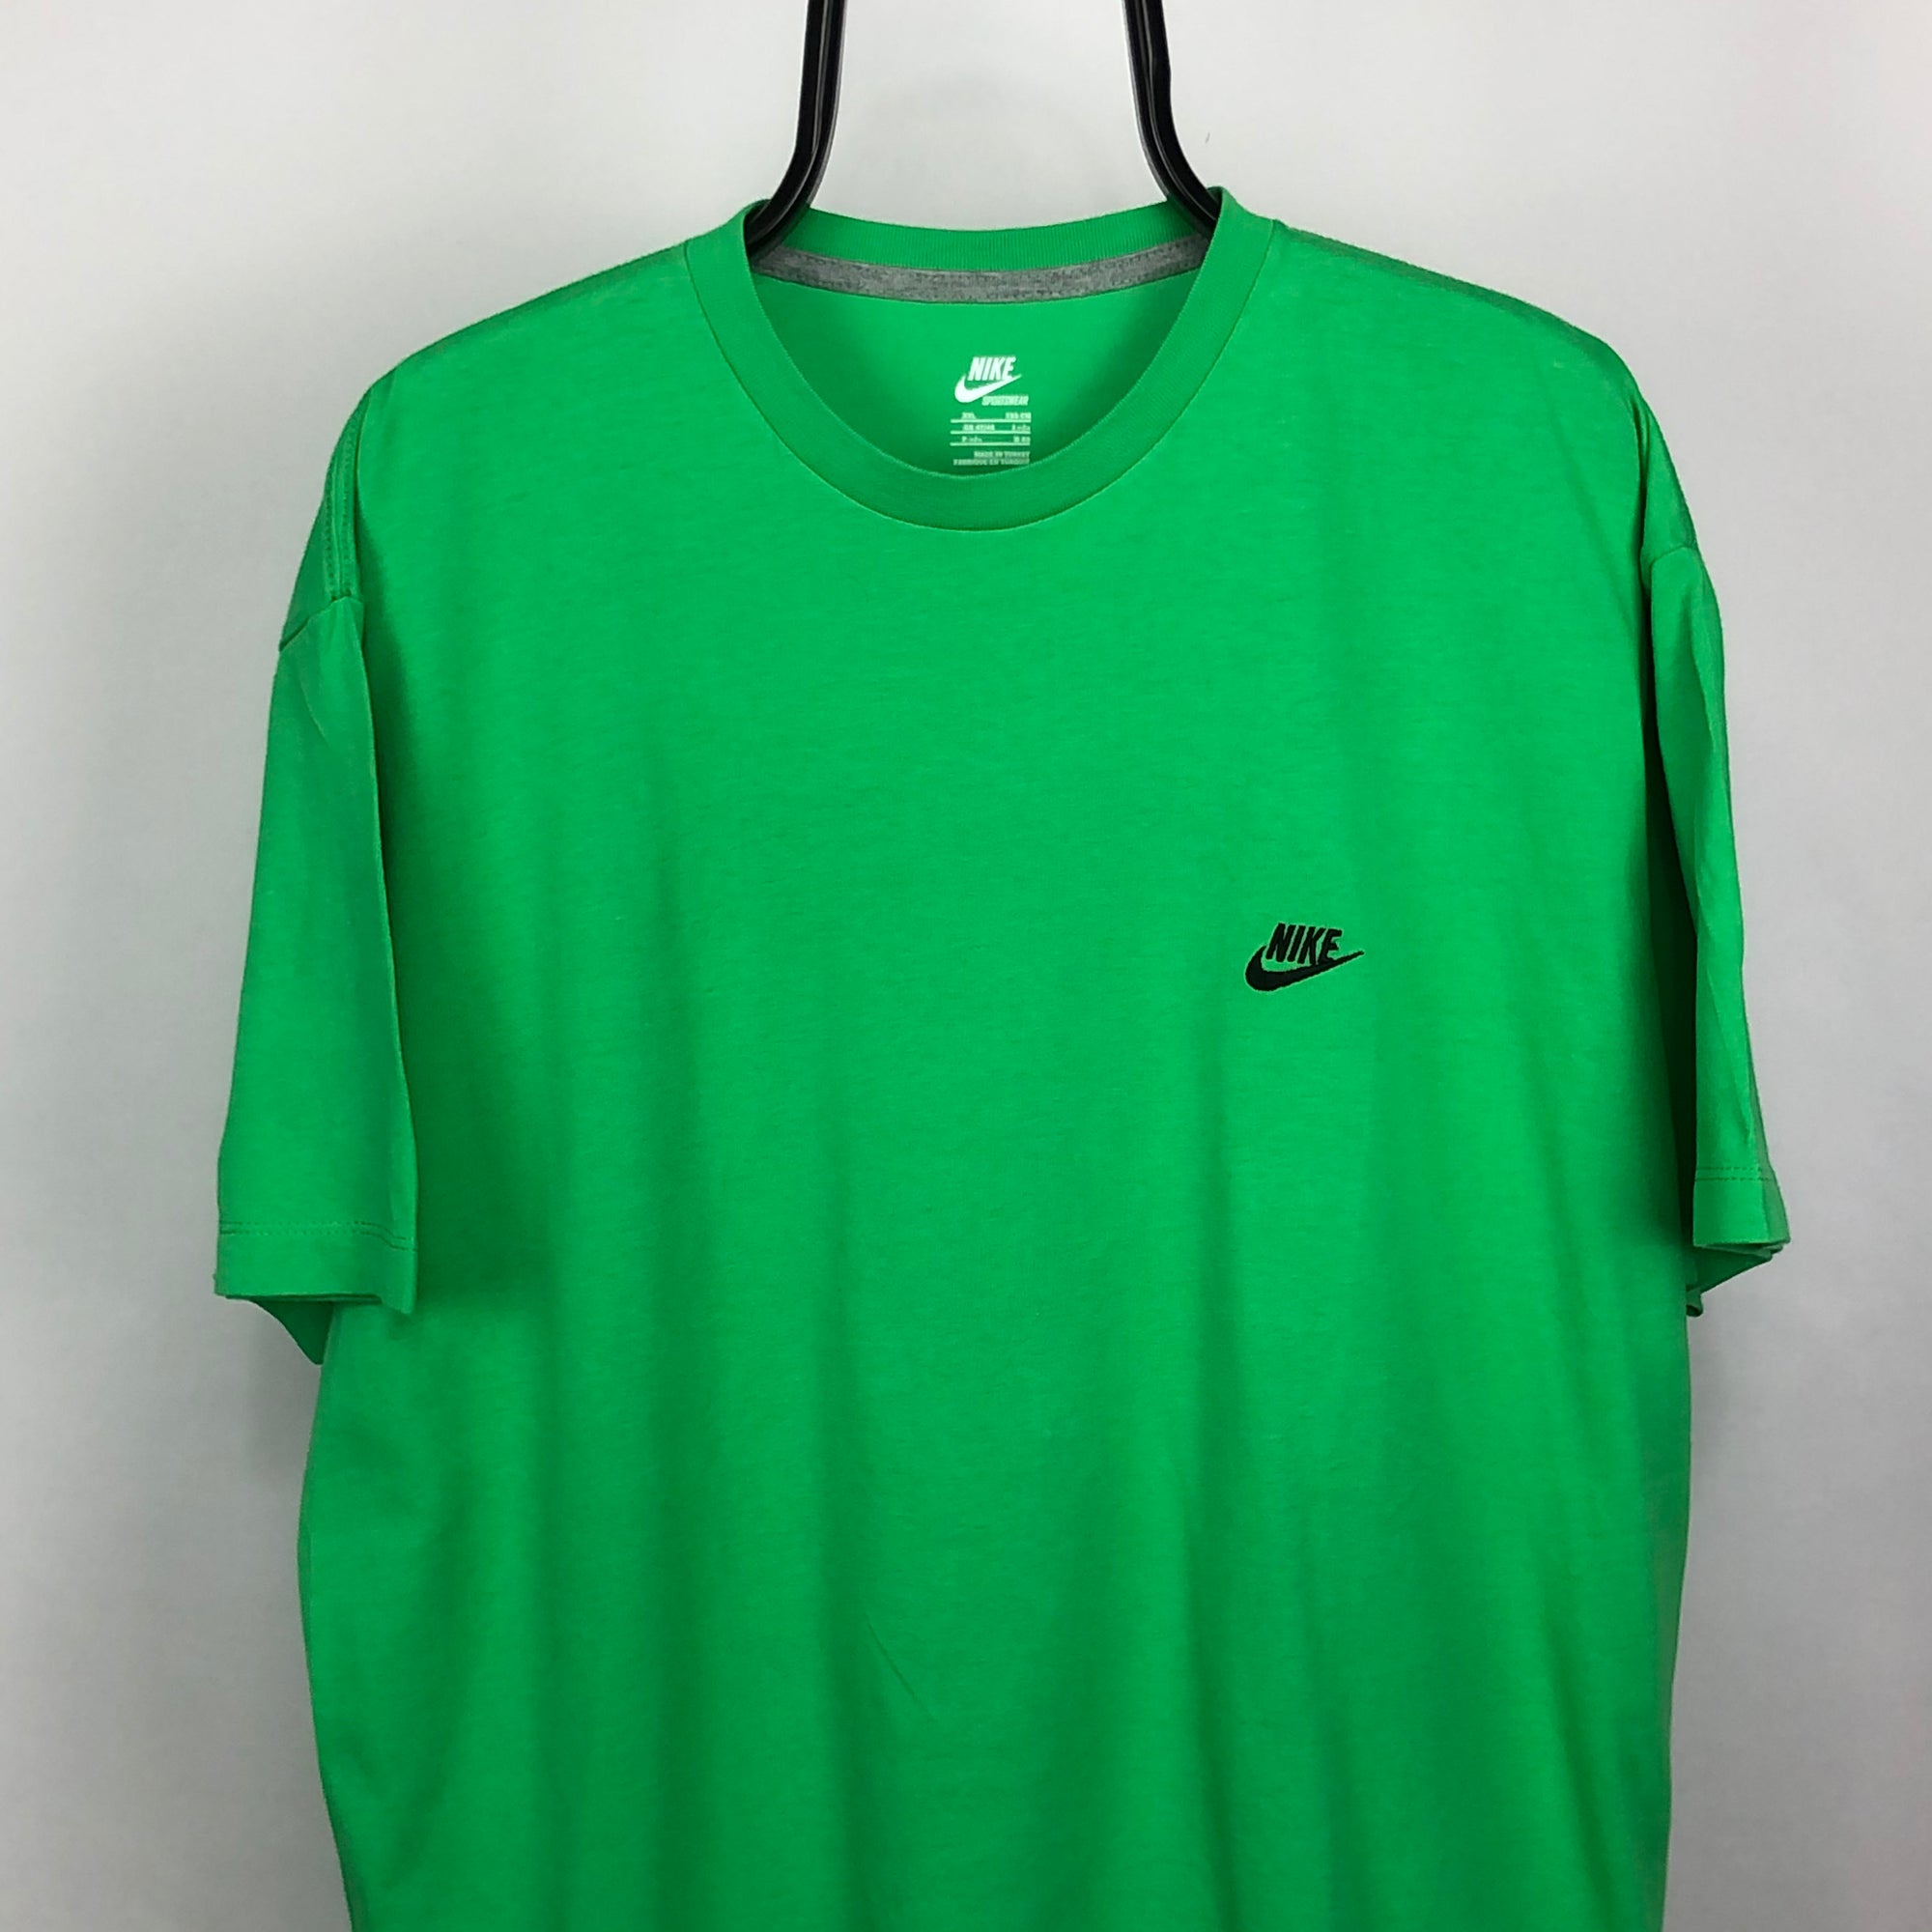 Nike Small Embroidered Spellout Tee in Green - Men's XL/Women's XXL